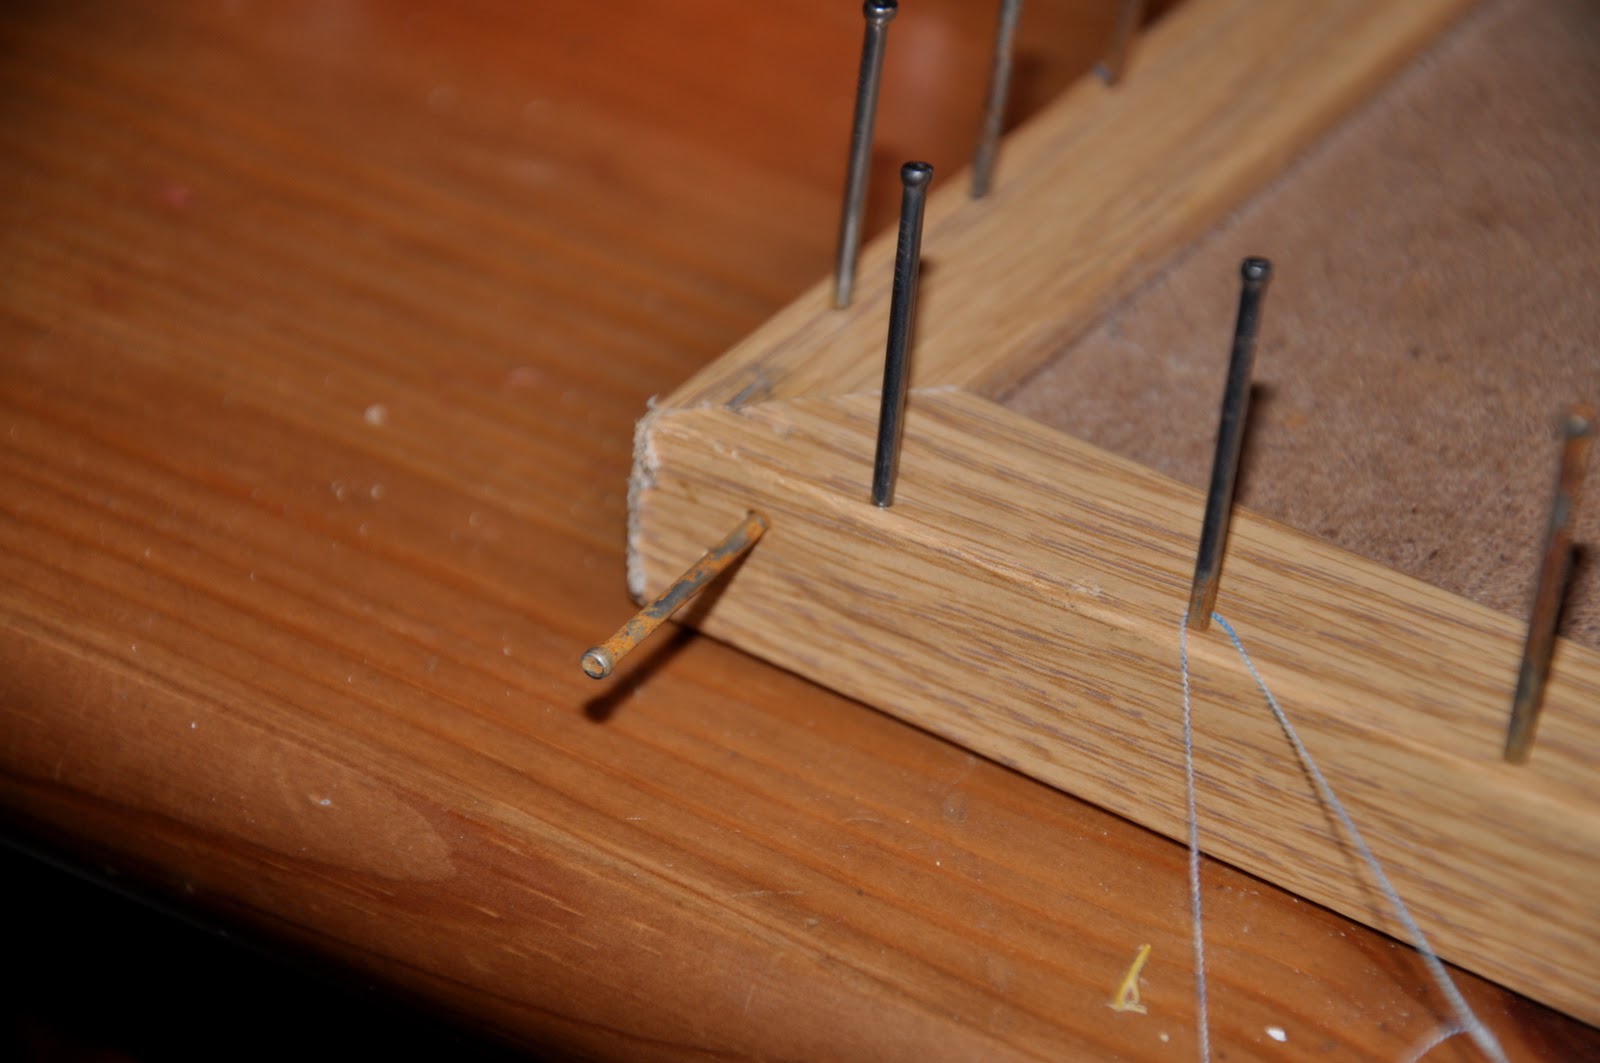 Place one extra nail at the start peg and finish peg of your loom to ...